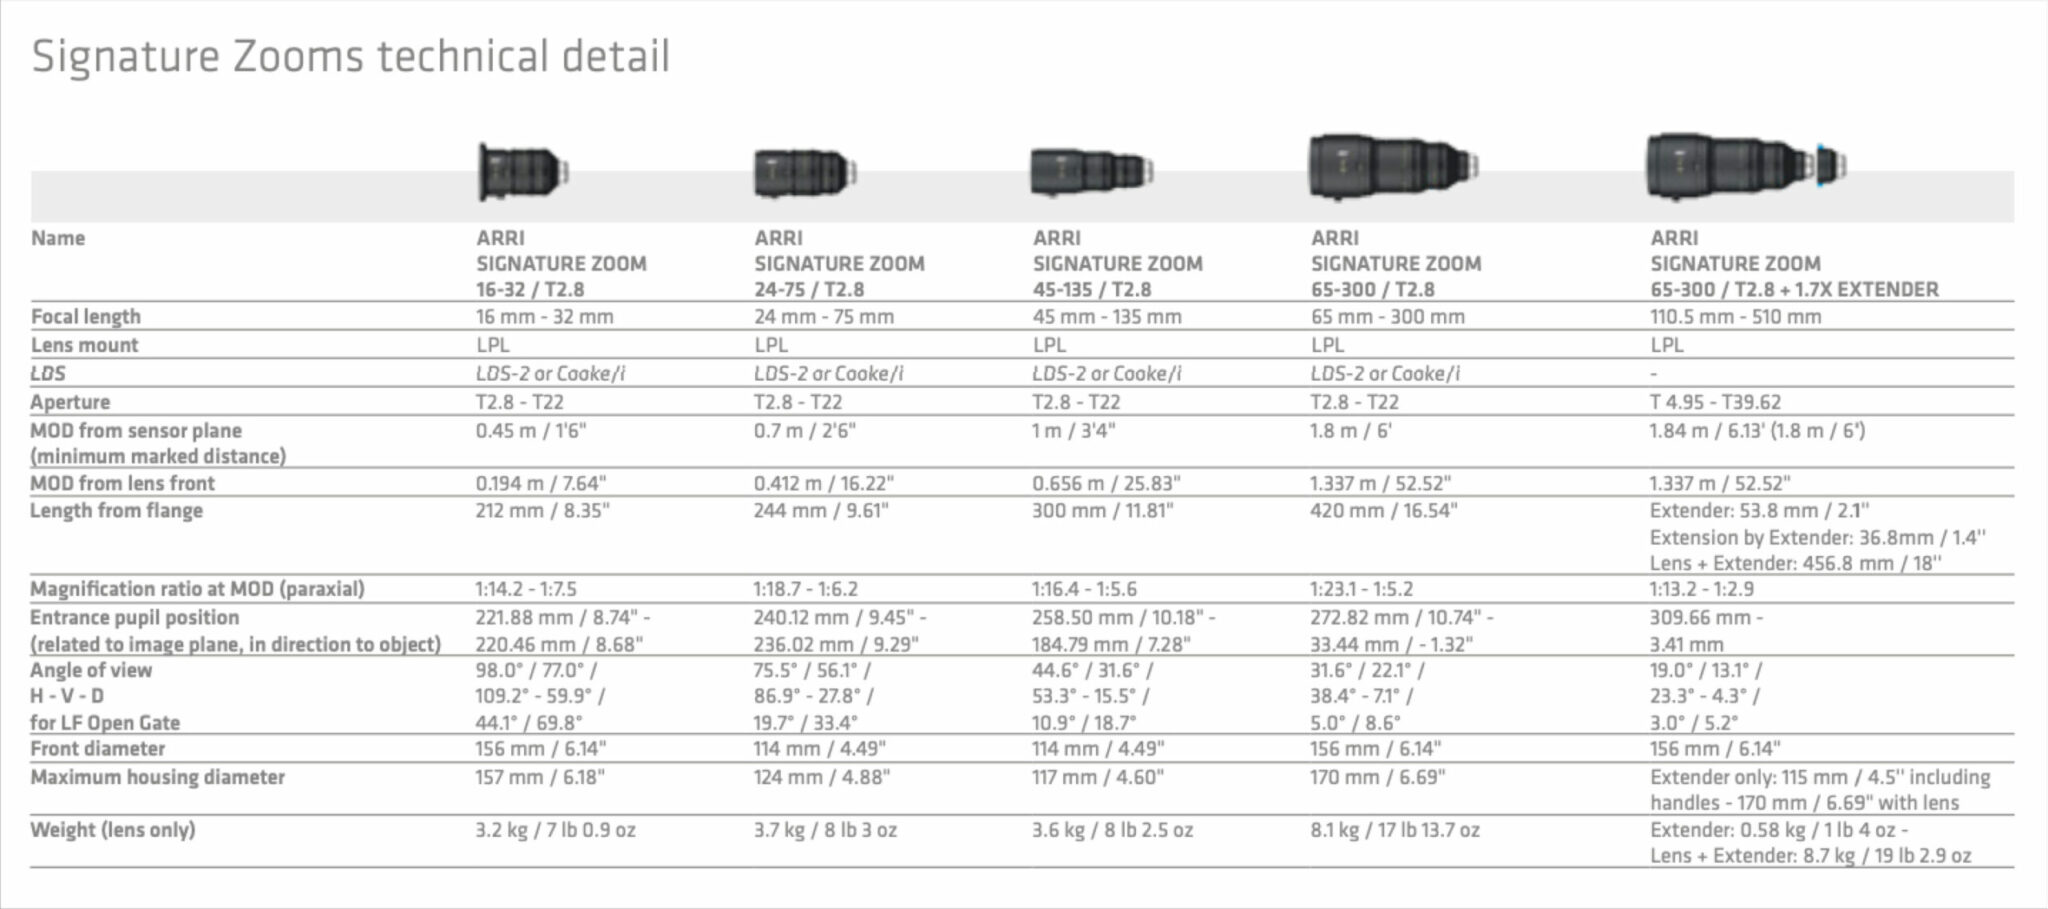 arri signature zoom menses technical detail visual sequence scaled